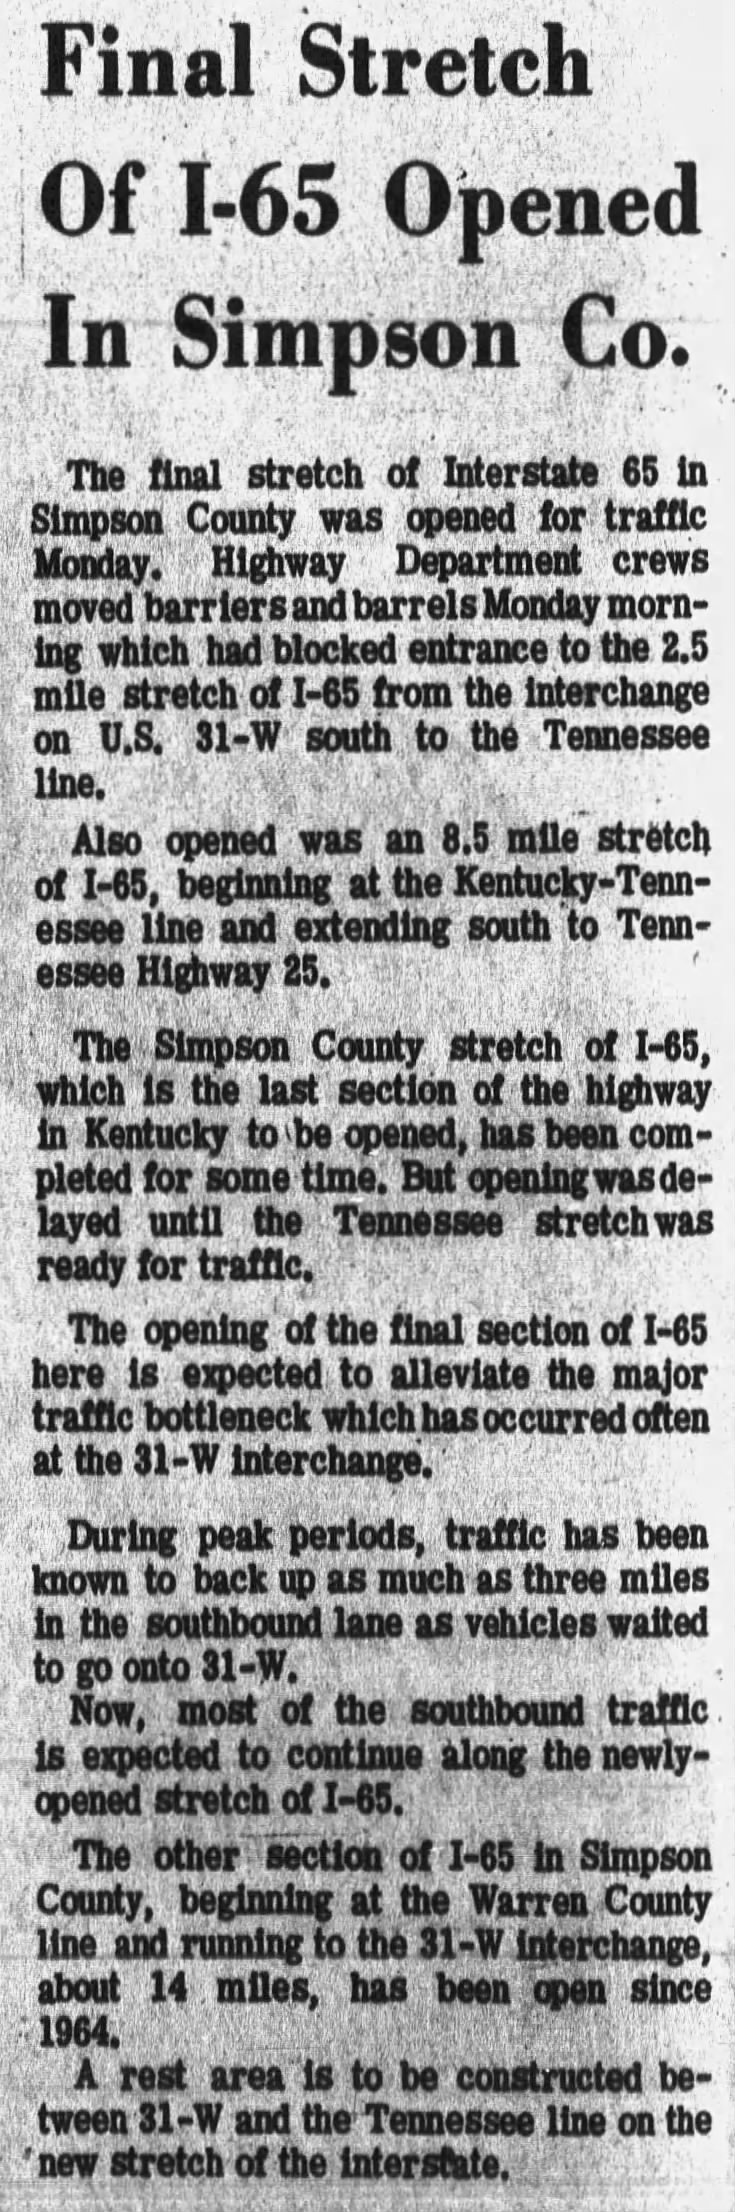 Final Stretch Of I-65 Opened In Simpson Co.